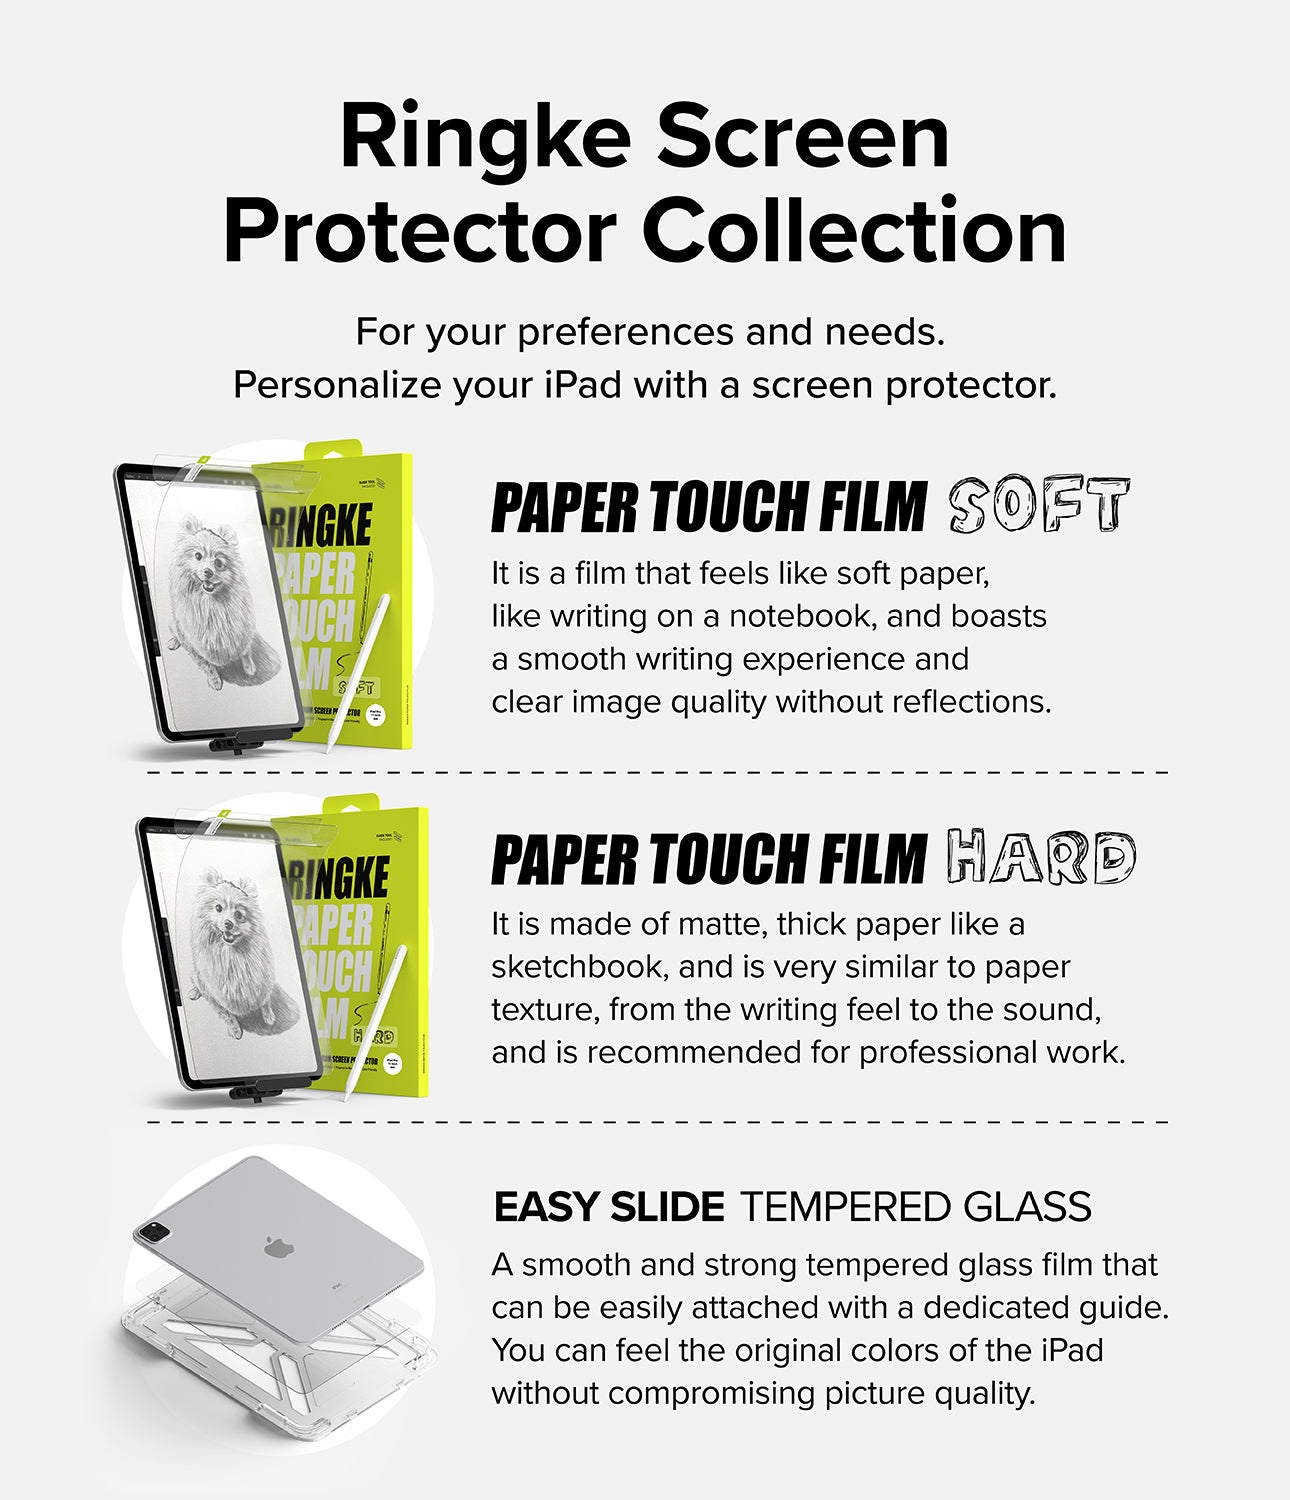 iPad Pro 11" (M4) Screen Protector | Paper Touch Film - Soft - Ringke Screen Protector Collection. For your preferences and needs. Personalize your iPad with a screen protector.